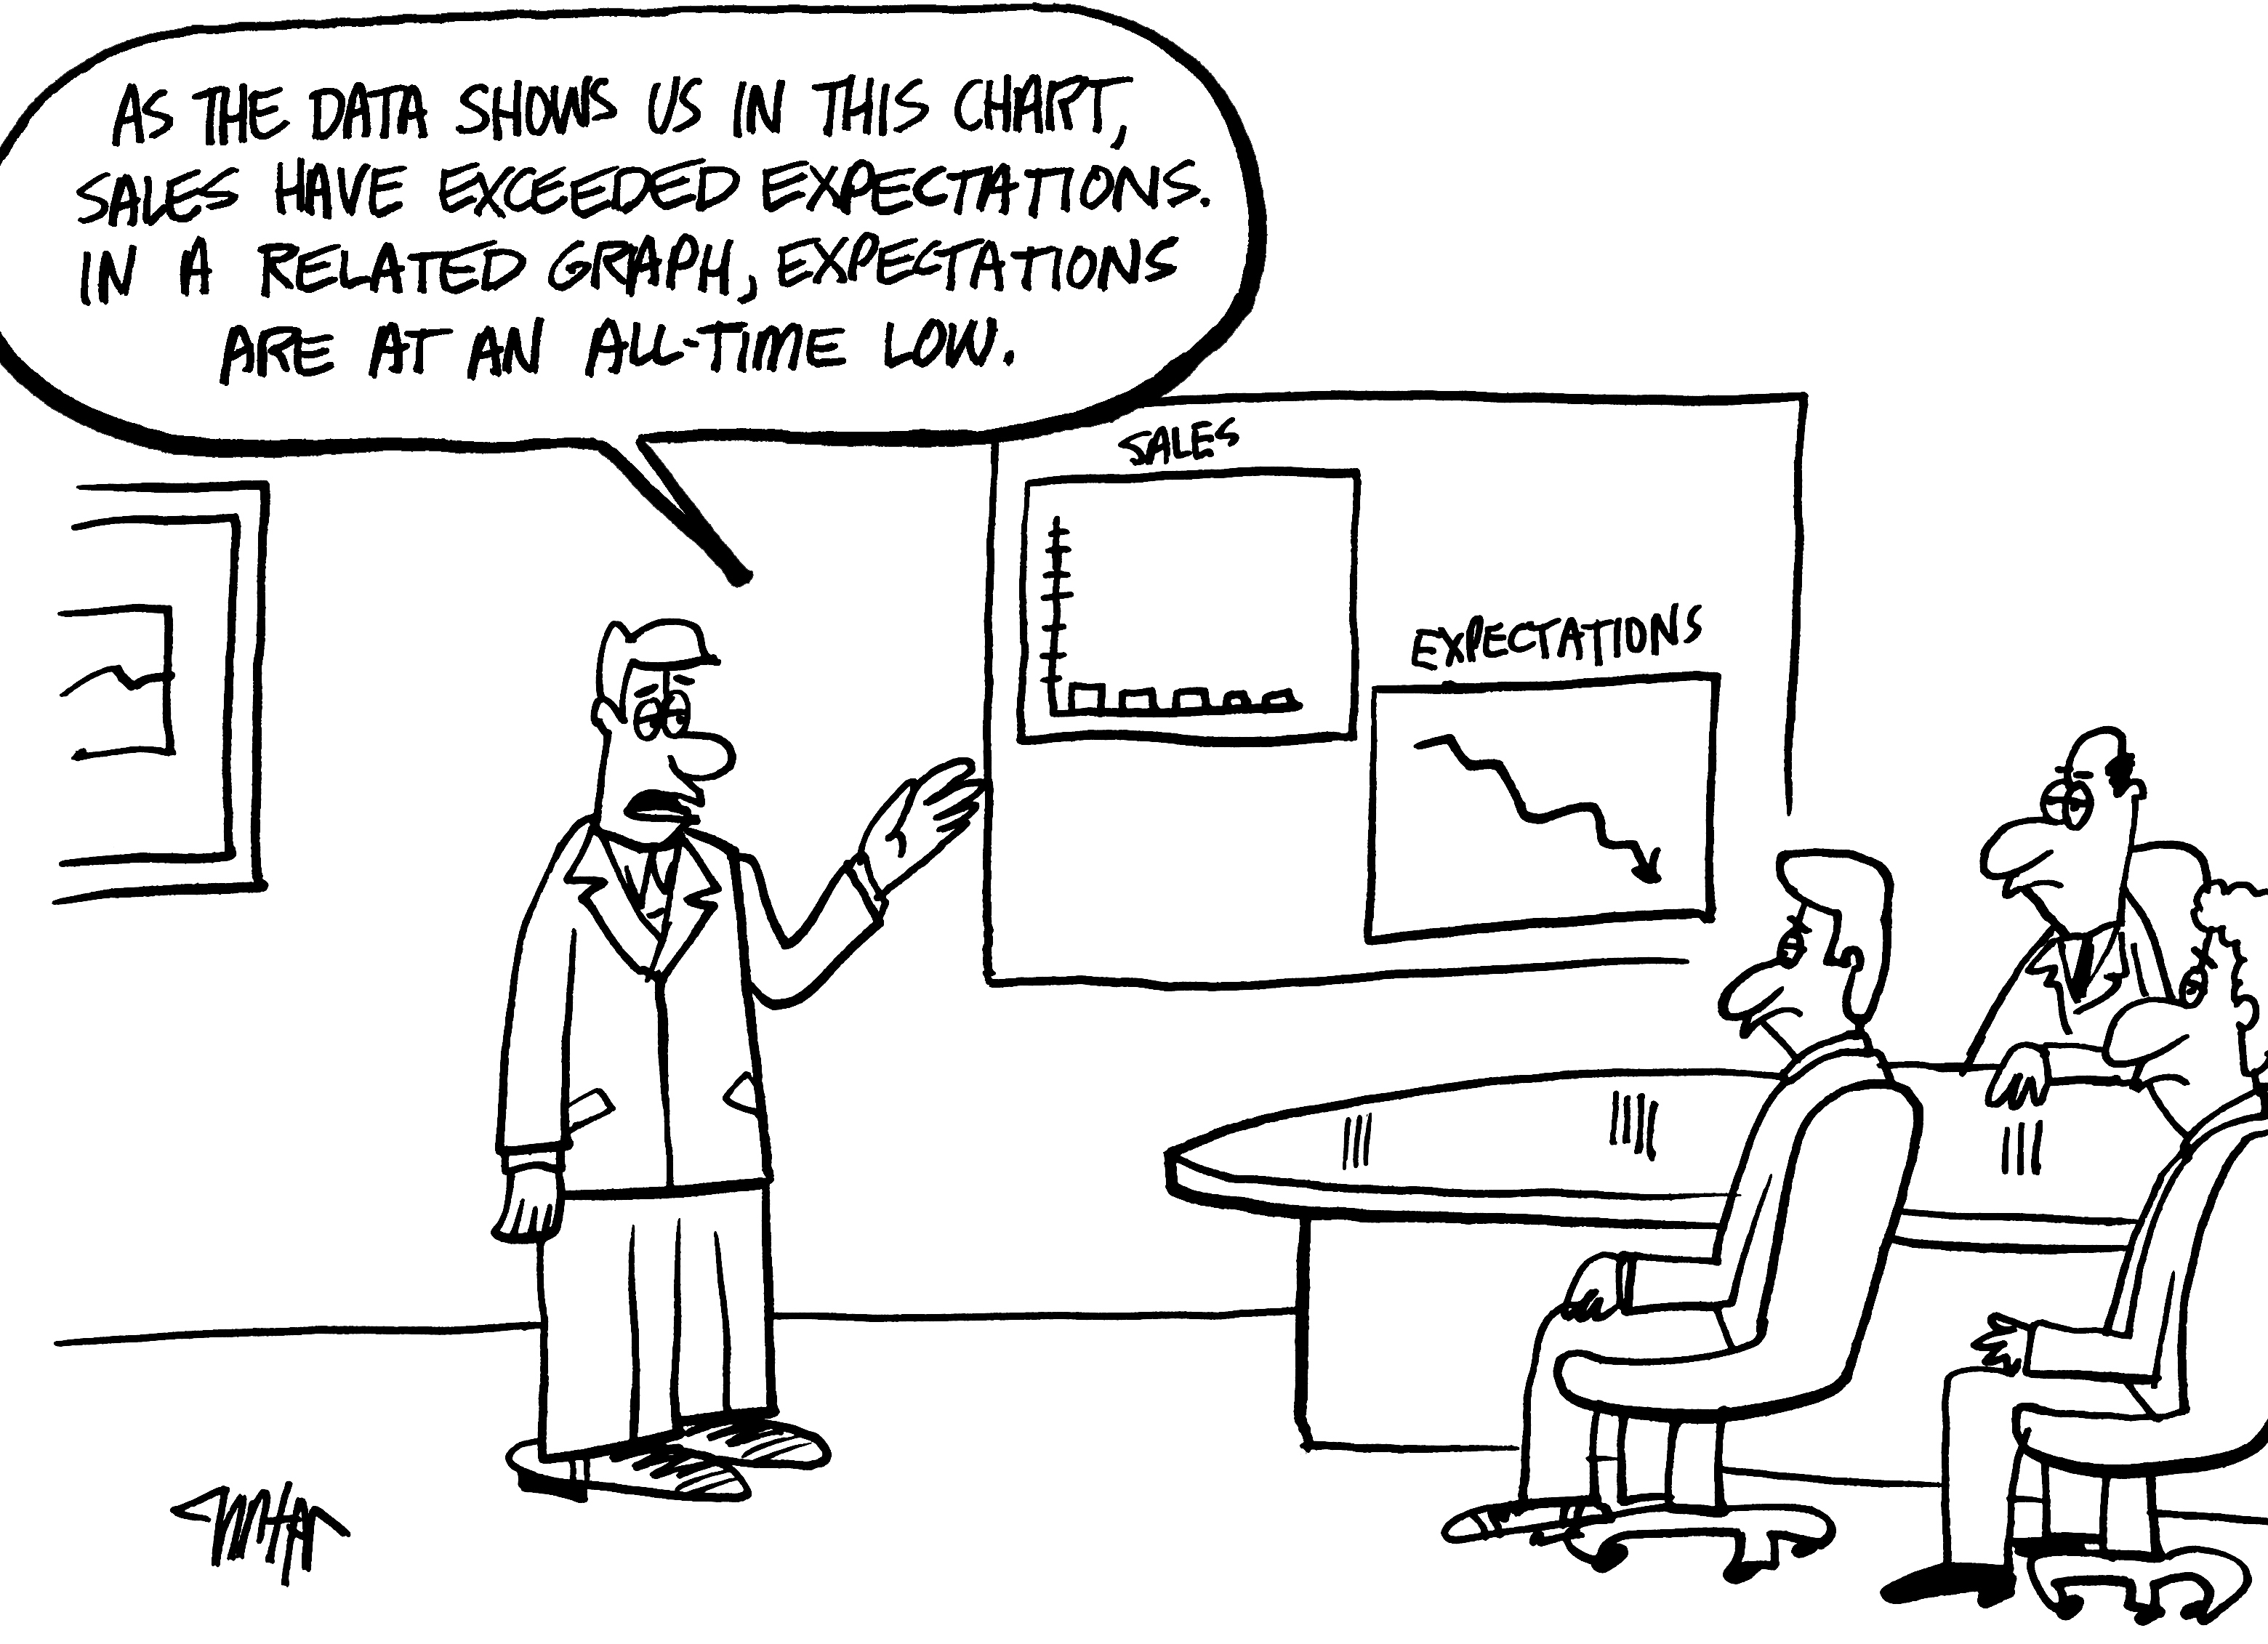 cartoon showing man in front of two graphs.  He says: As the data shows us in this chart, sales have exceeded expectations. In a related graph, expectations are at an all-time low.